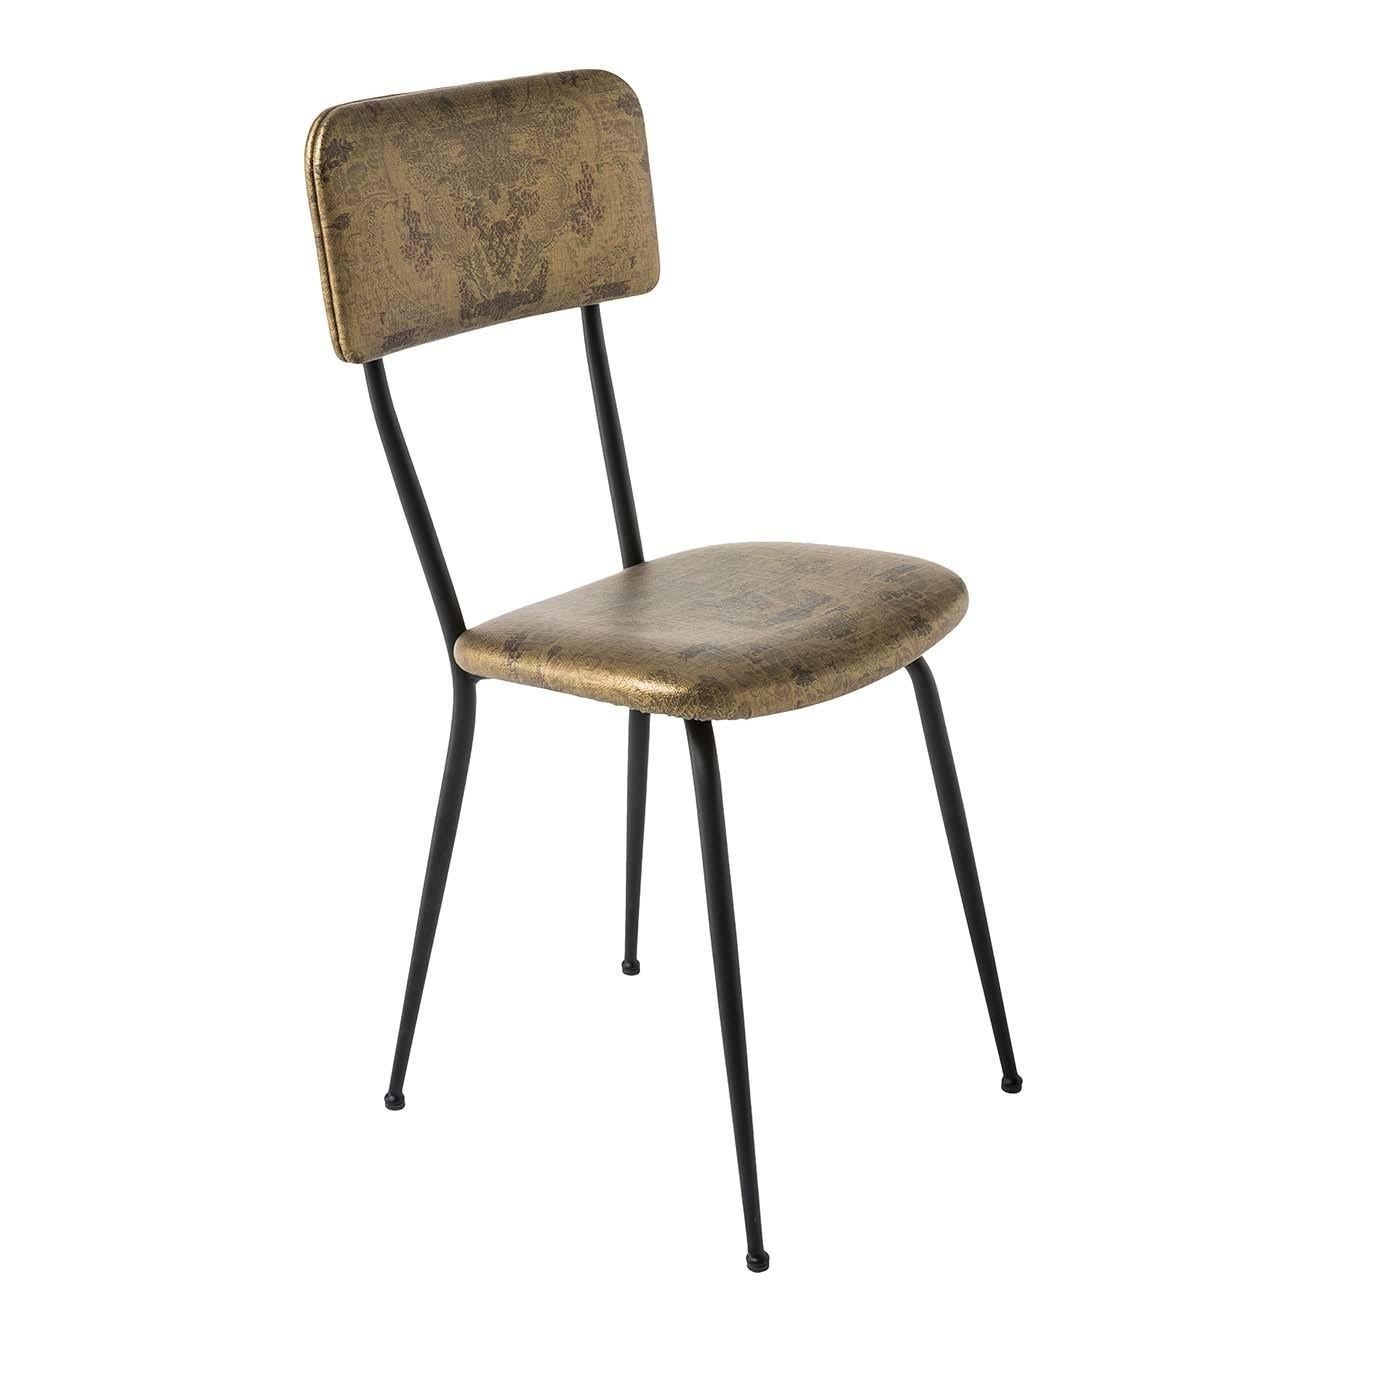 This chair has a vintage-inspired look thanks to the distressed gold finish on the fireproof, technical fabric used to upholster the seat and back. Both seat and back are structured with polyurethane and curved wood inserts for comfort, while the